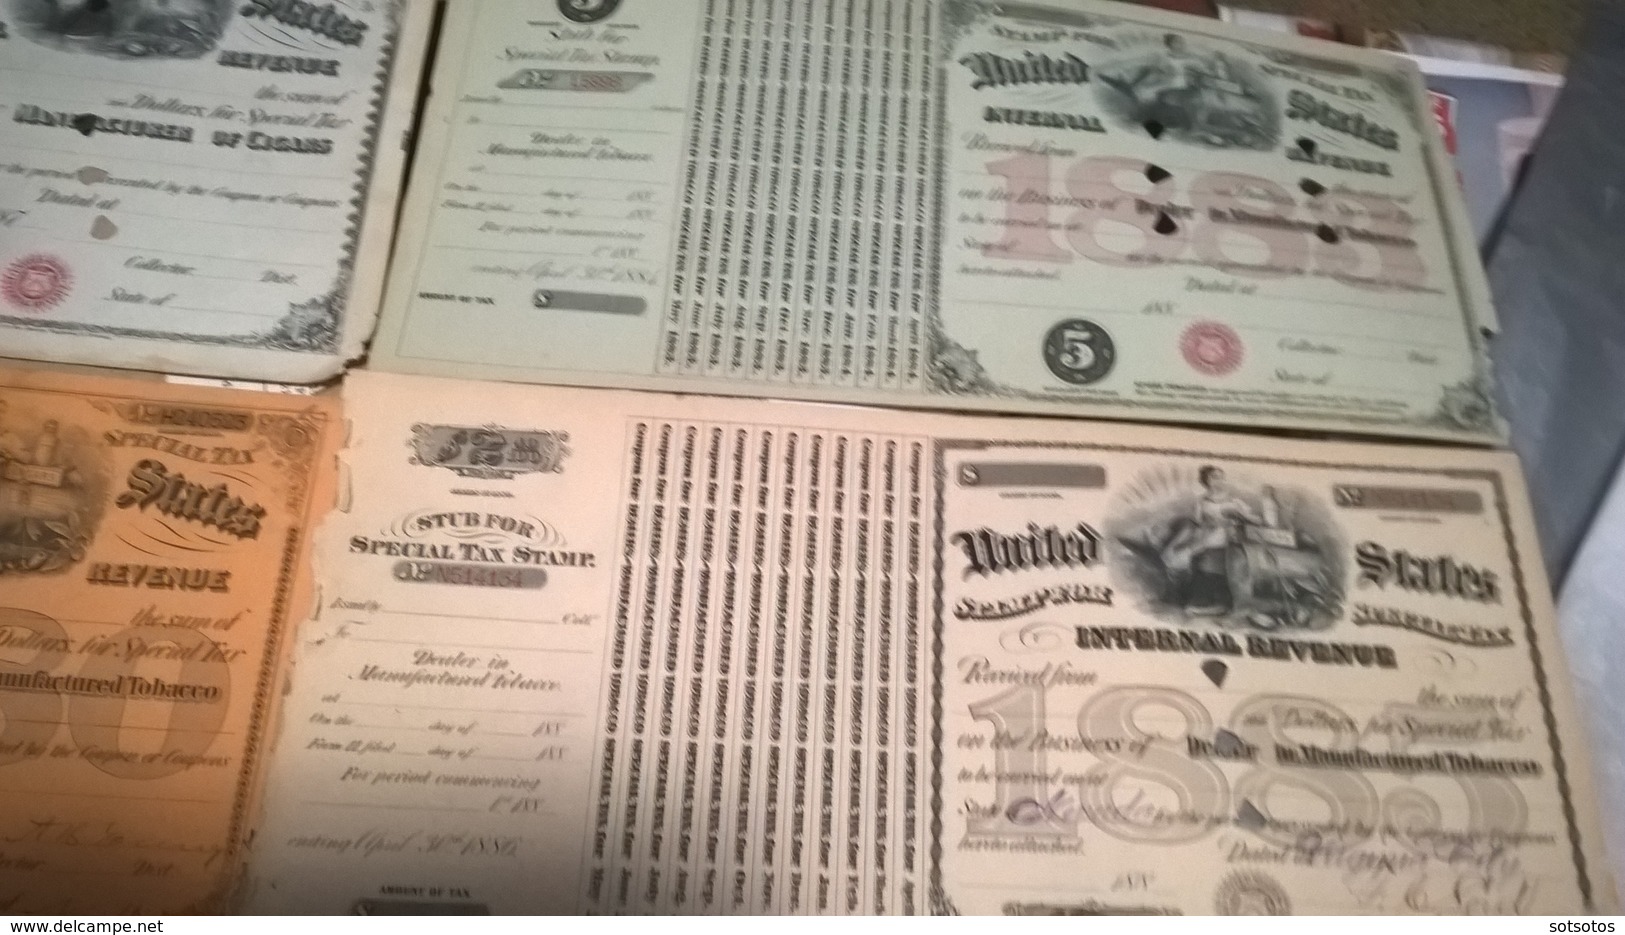 4 TOBACCO Related STOCK CERTIFICATES GROUP Of Mostly Unissued 1880's (1874-1880-1883-1885) - Documenti